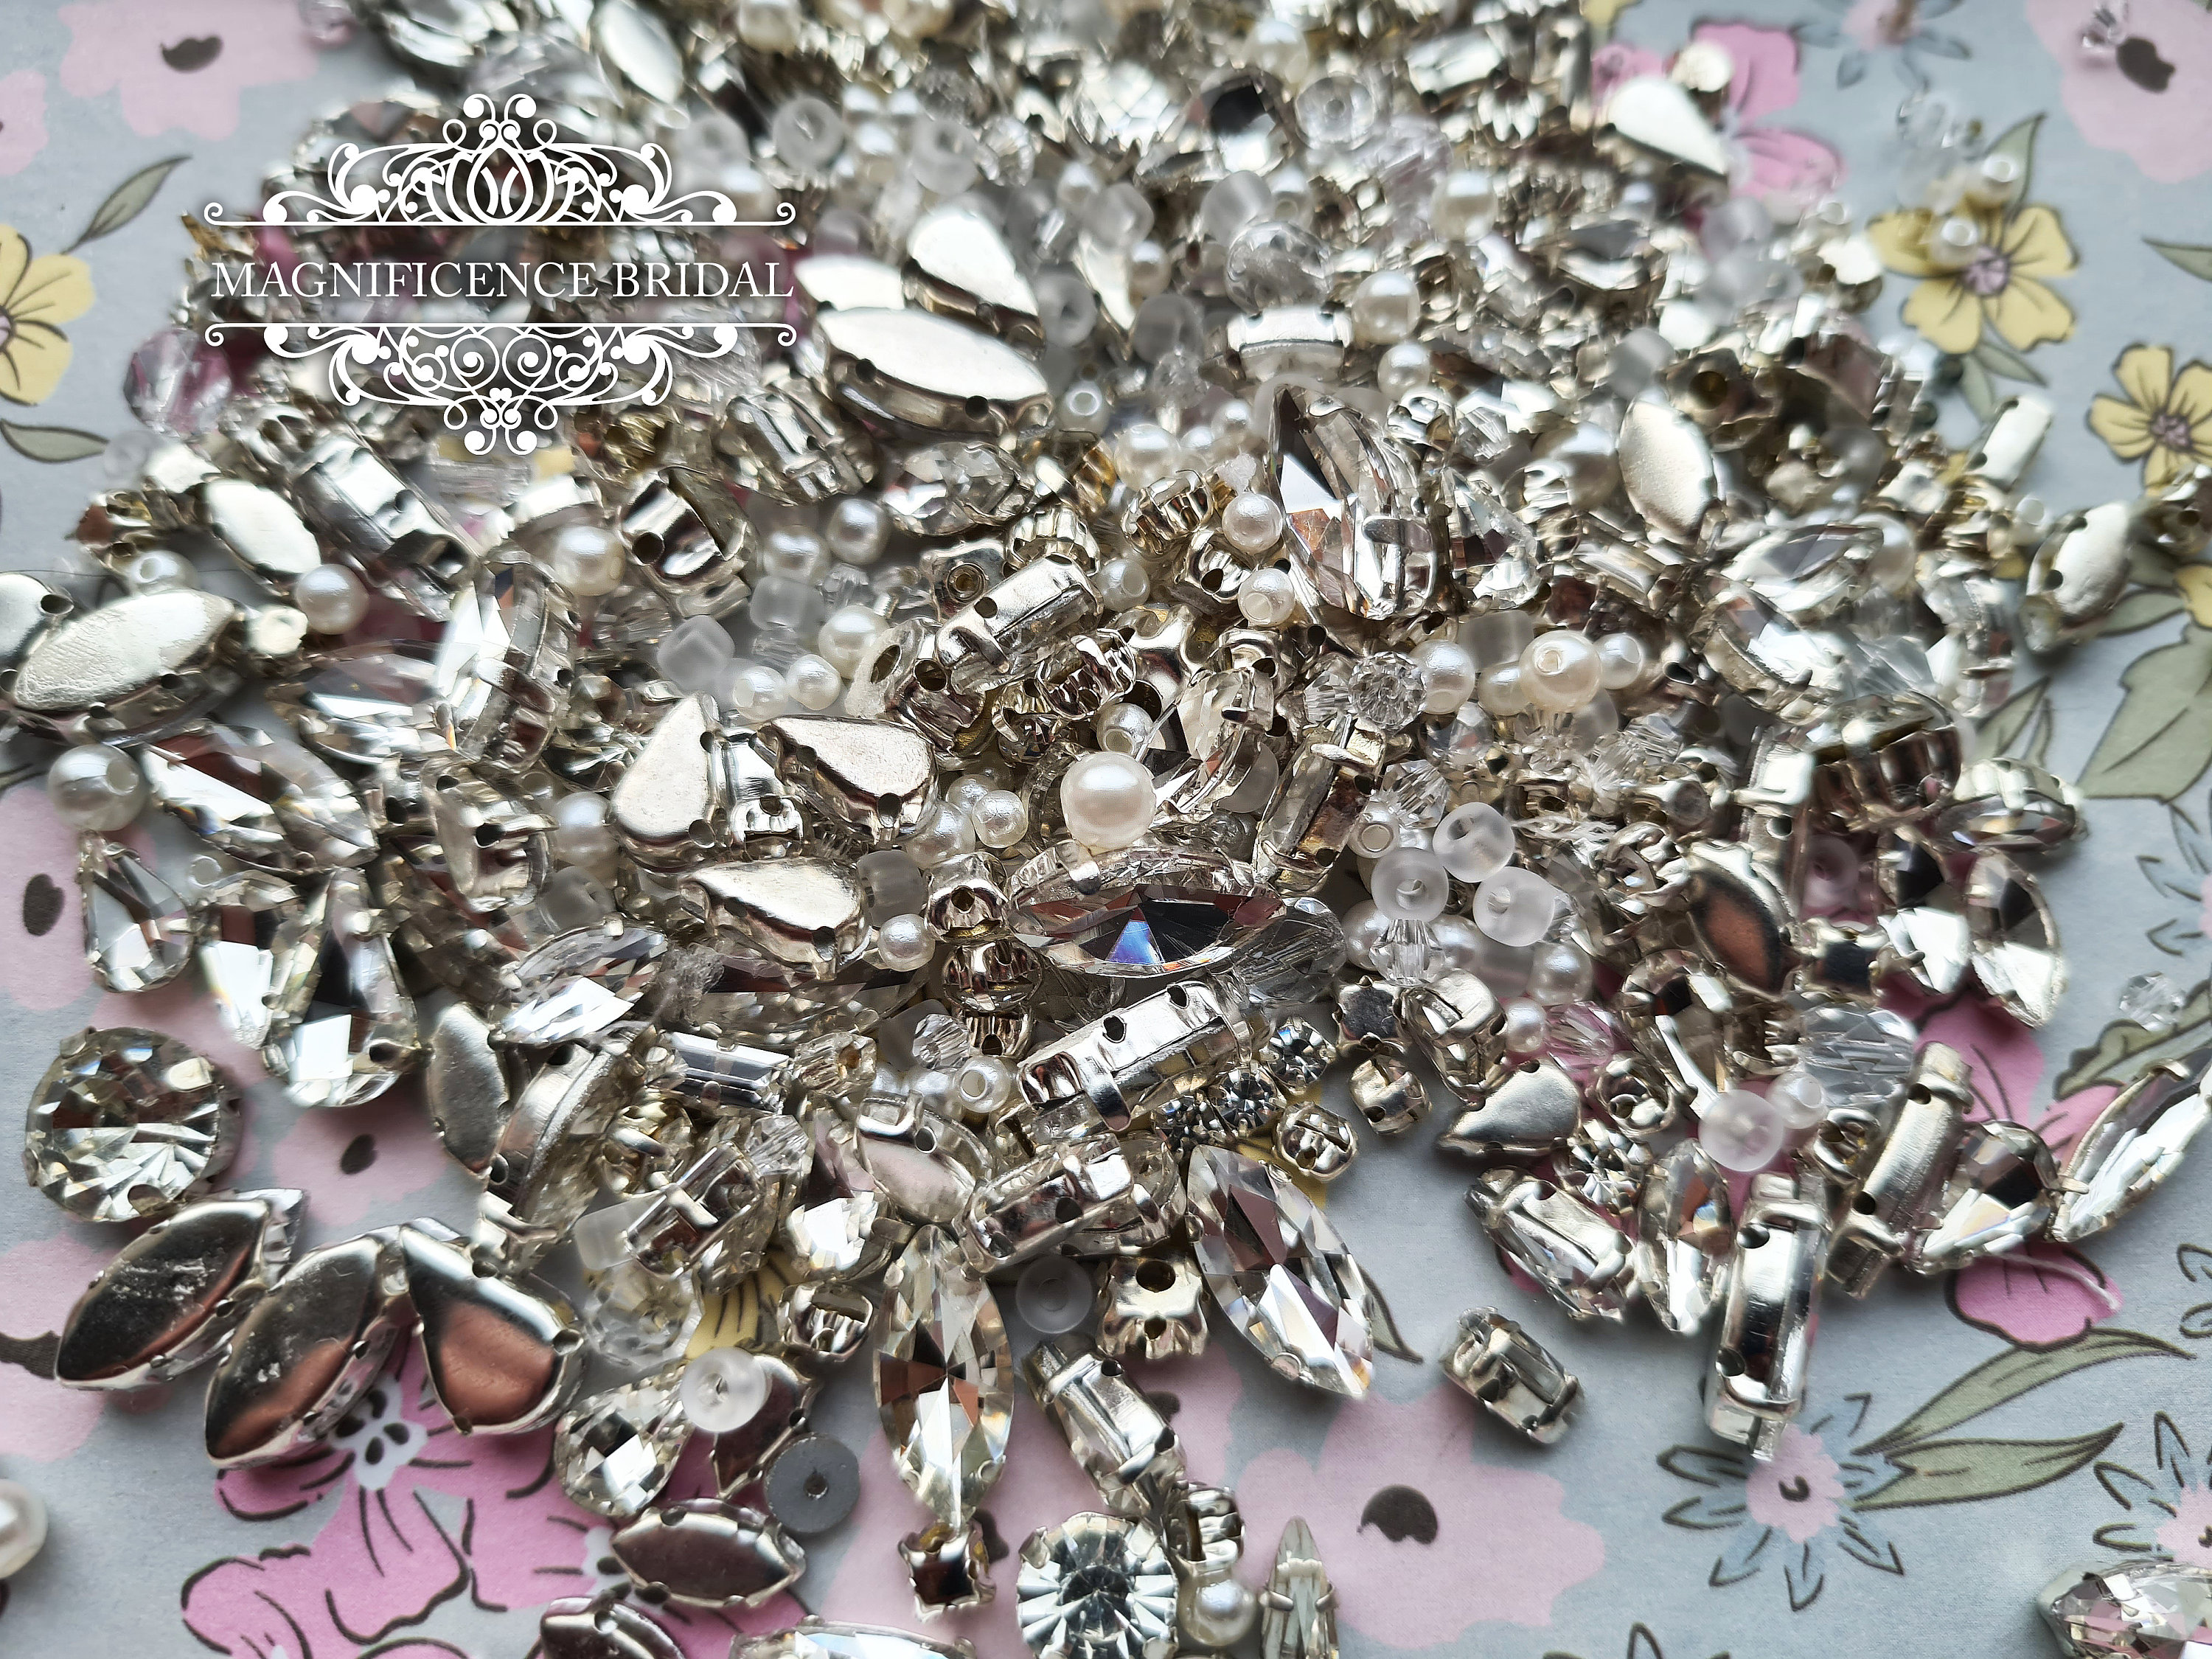  240 Pieces Large Sew on Rhinestones Clear Sew on Glass